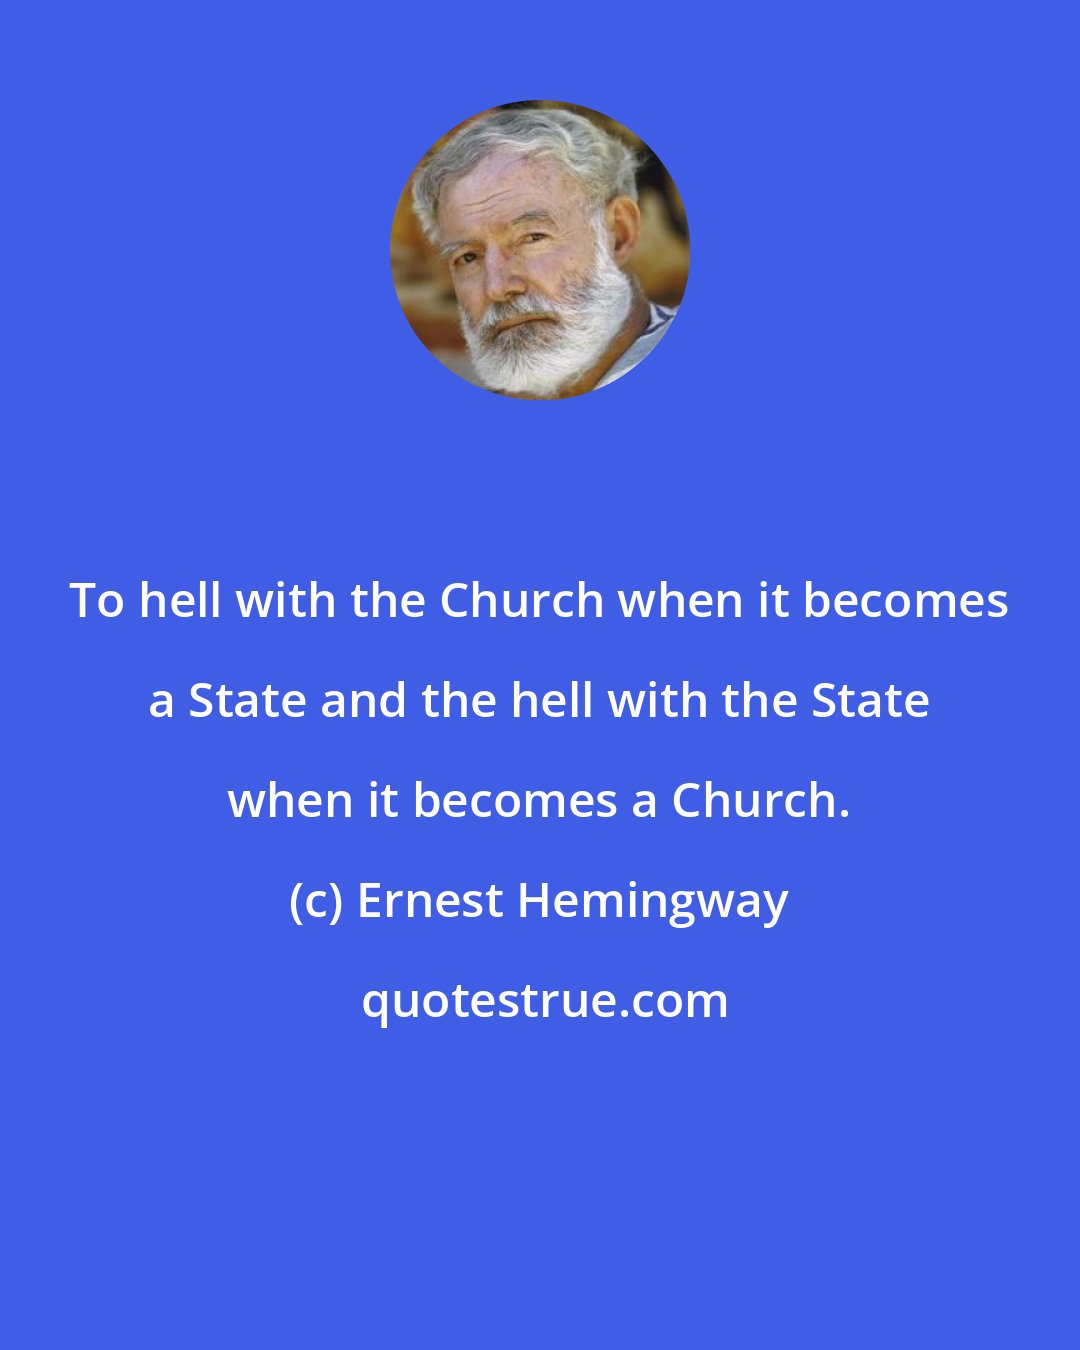 Ernest Hemingway: To hell with the Church when it becomes a State and the hell with the State when it becomes a Church.